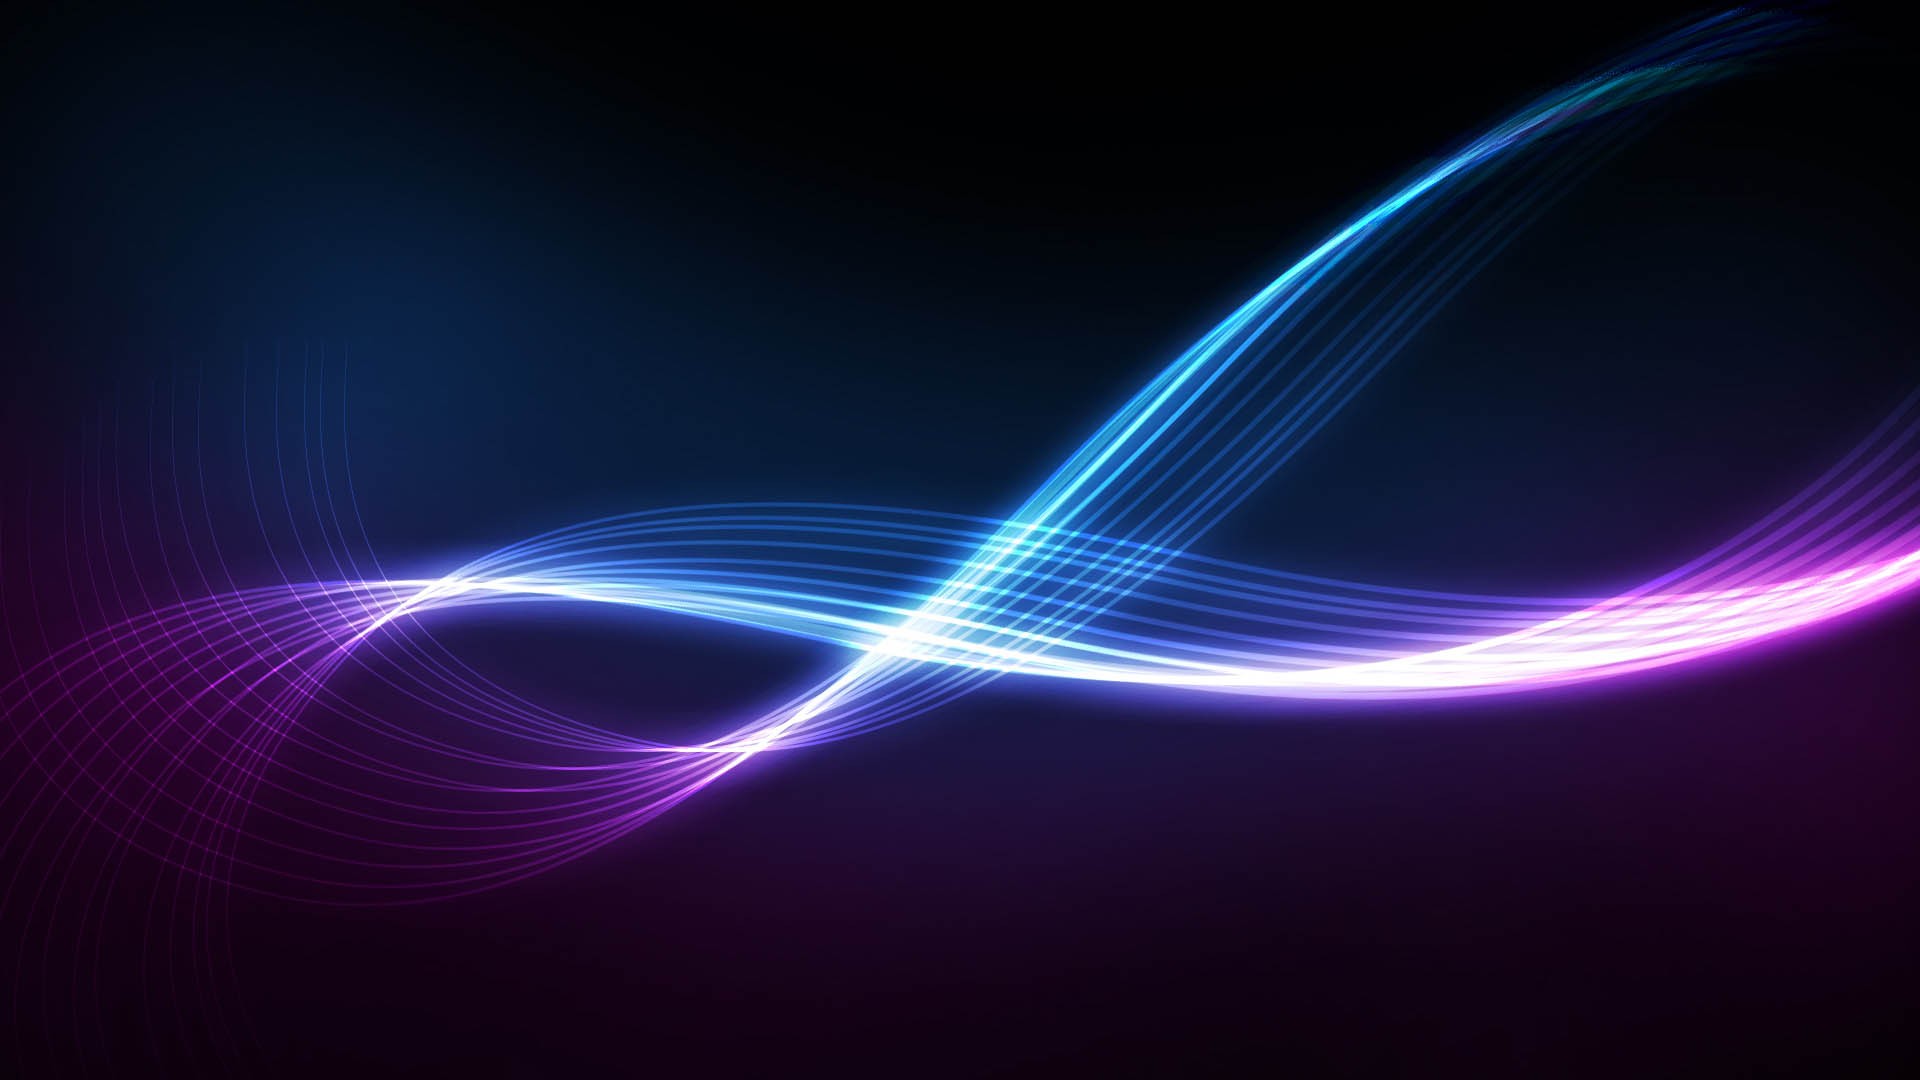 Abstract wallpaper 1920x1080 ·① Download free cool full HD